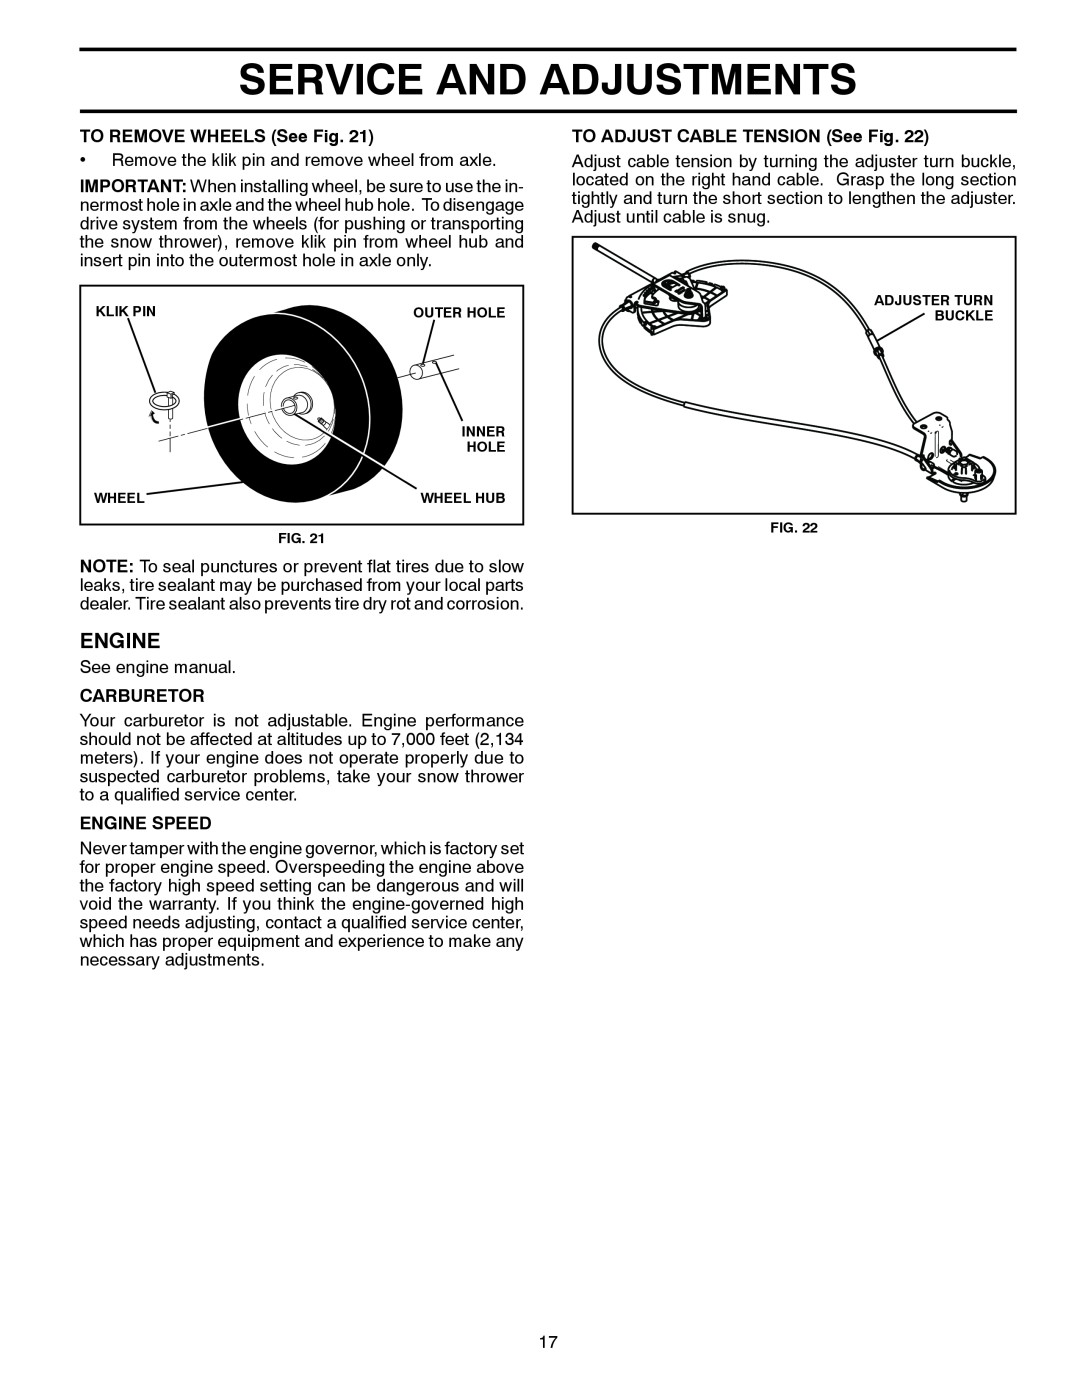 McCulloch 96192004102 owner manual Service And Adjustments, TO REMOVE WHEELS See Fig, Carburetor, Engine Speed 